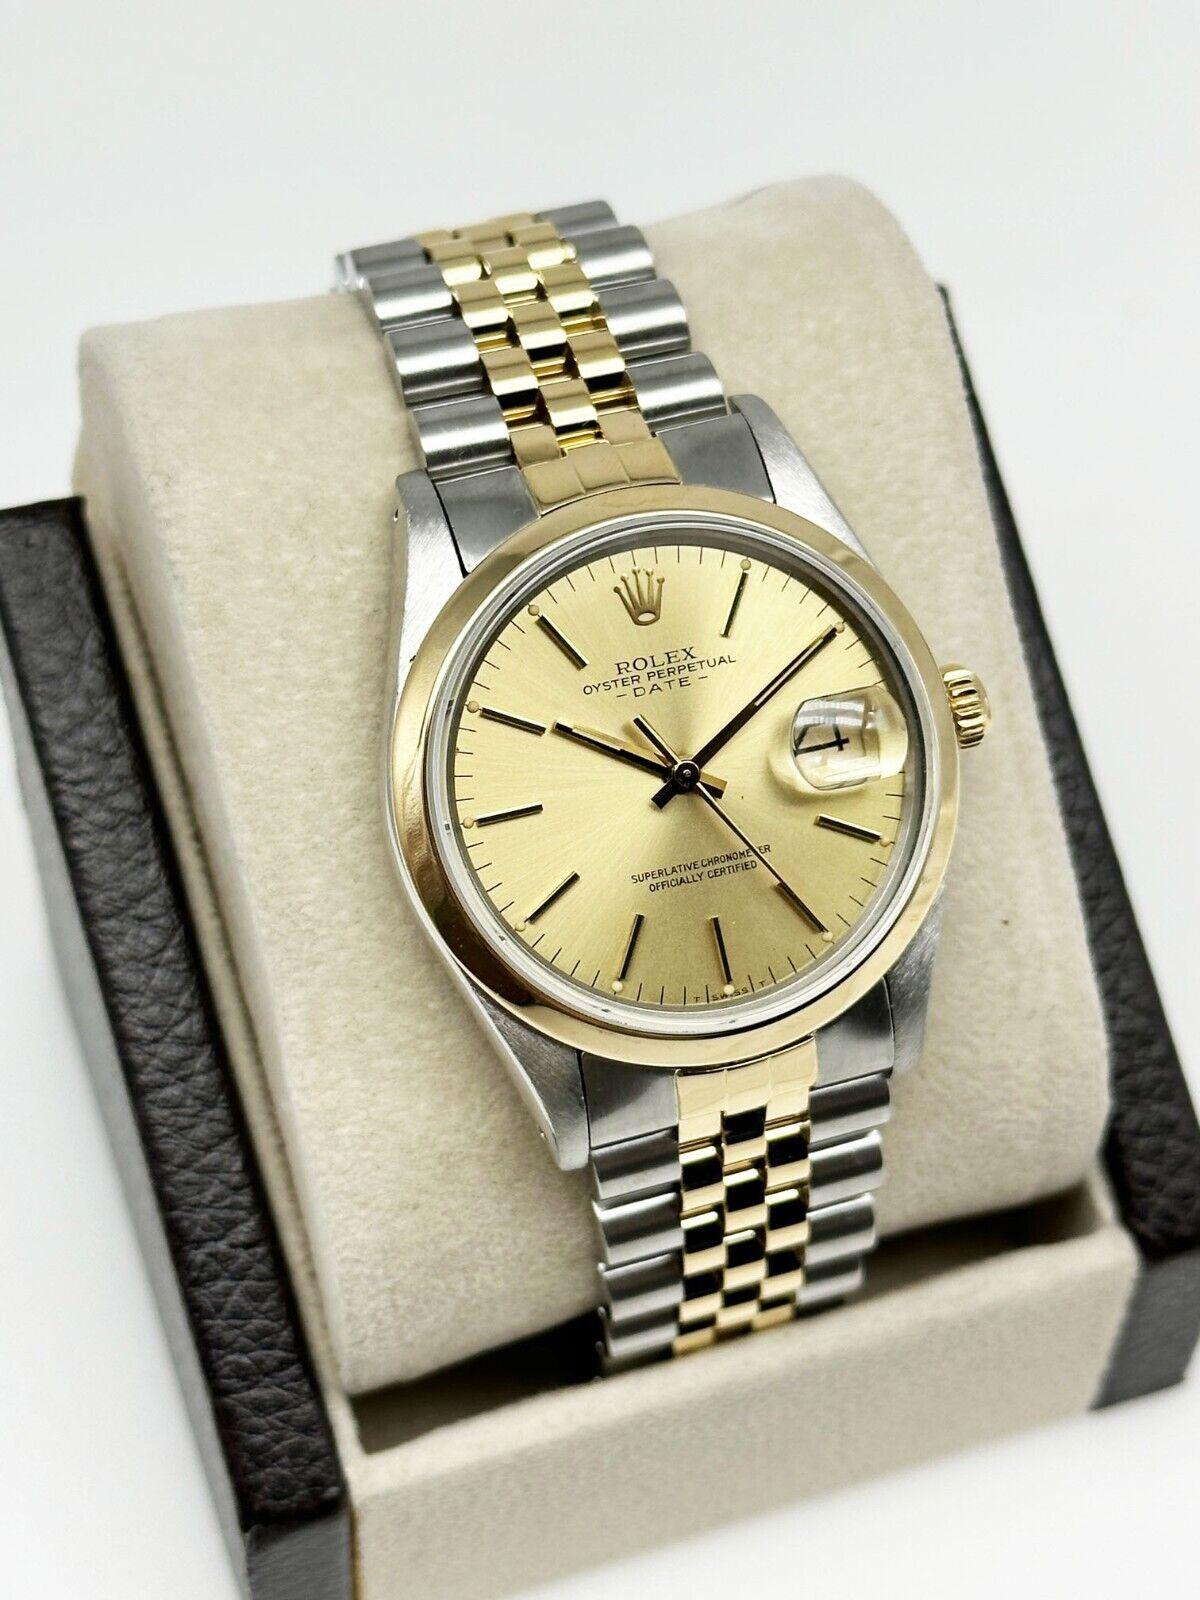 Style Number: 15003

Serial: 7422***

Year: 1983

Model: Date

Case Material: Stainless Steel

Band: 18K Yellow Gold and Stainless Steel

Bezel: 18K Yellow Gold

Dial: Champagne

Face: Sapphire Crystal

Case Size: 34mm

Includes: 

-Elegant Watch